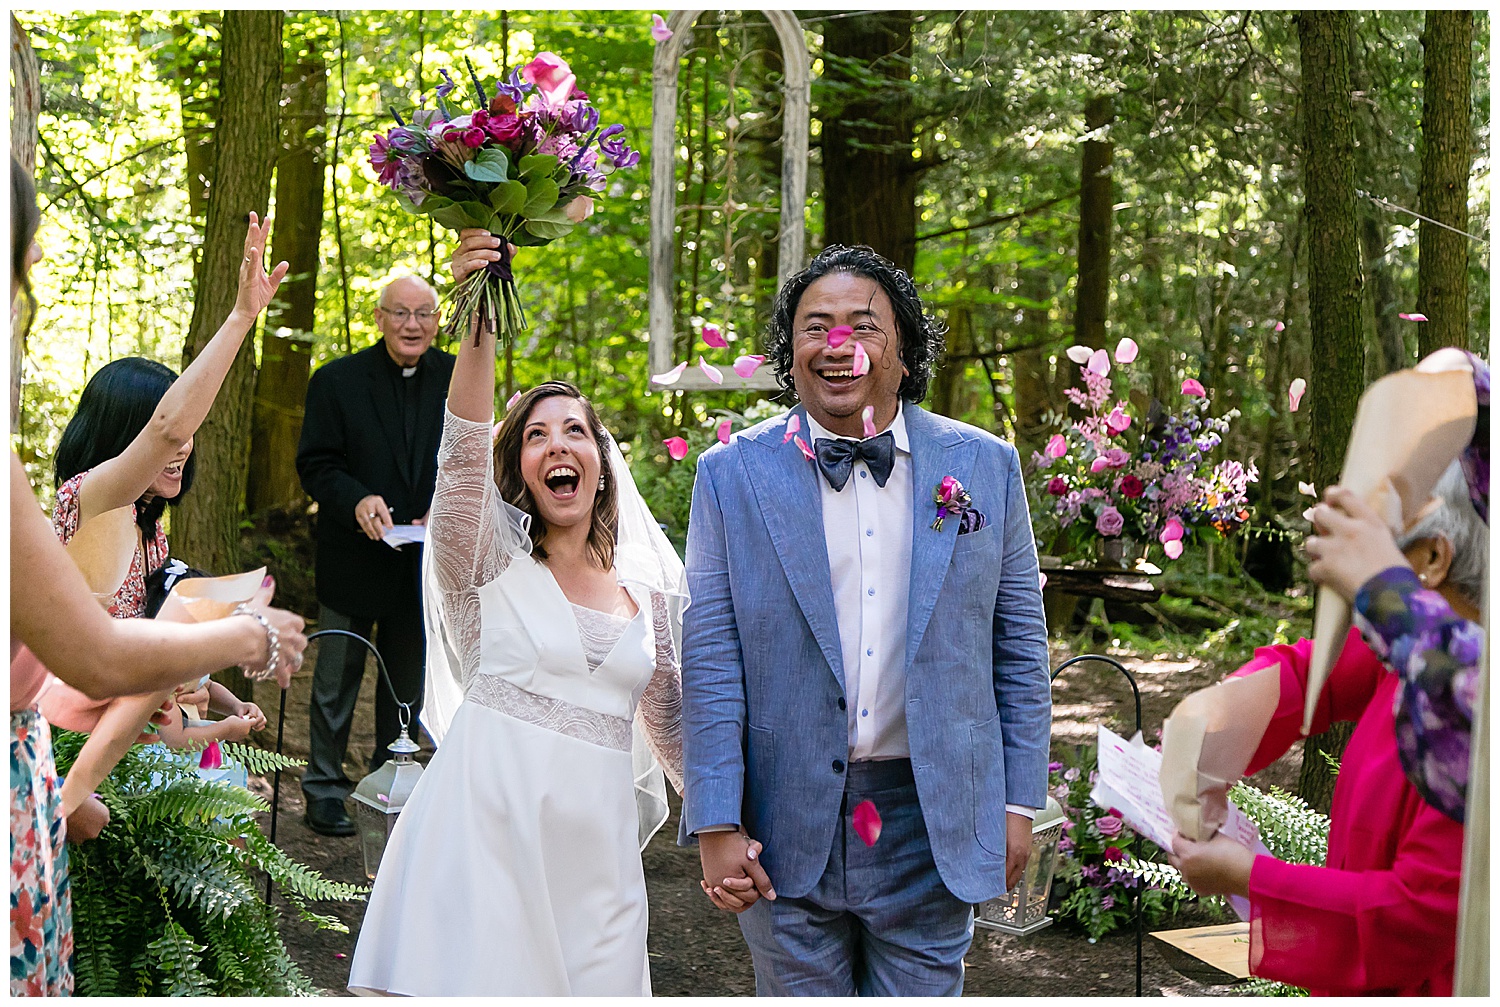 throwing flowers at the end of the elopement ceremony at whispering springs